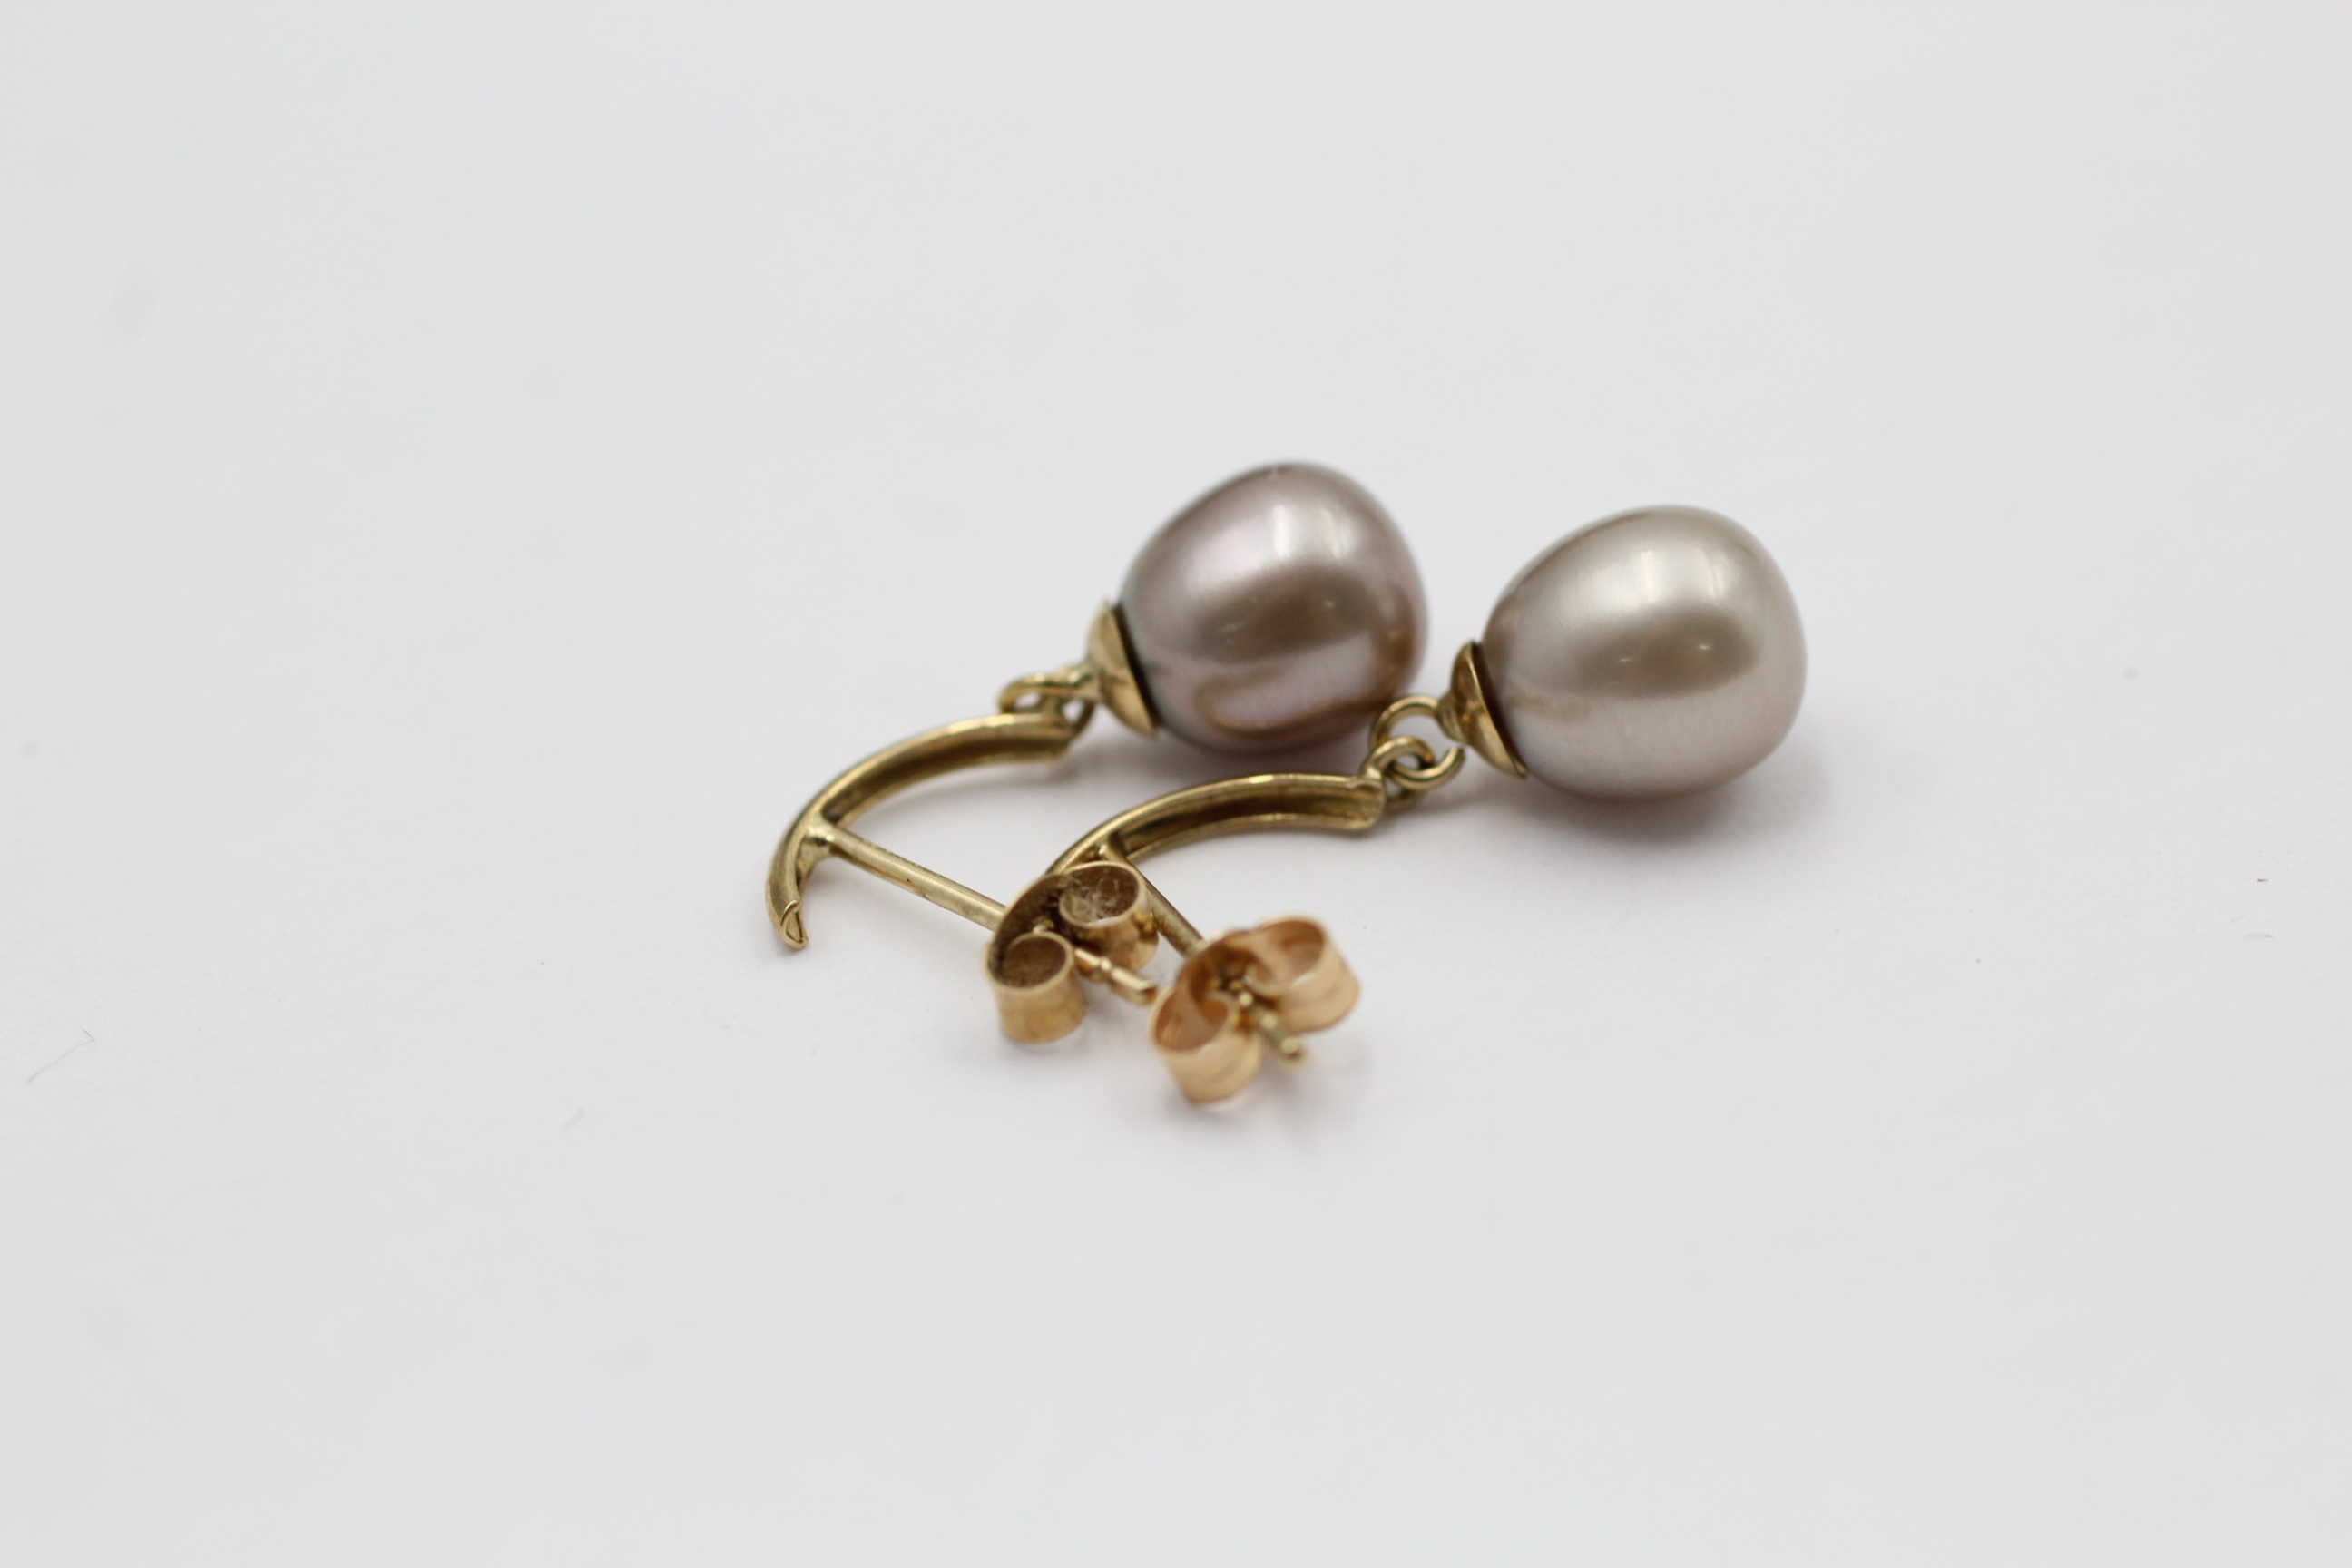 9ct gold pearl drop earrings (1.6g) - Image 2 of 4